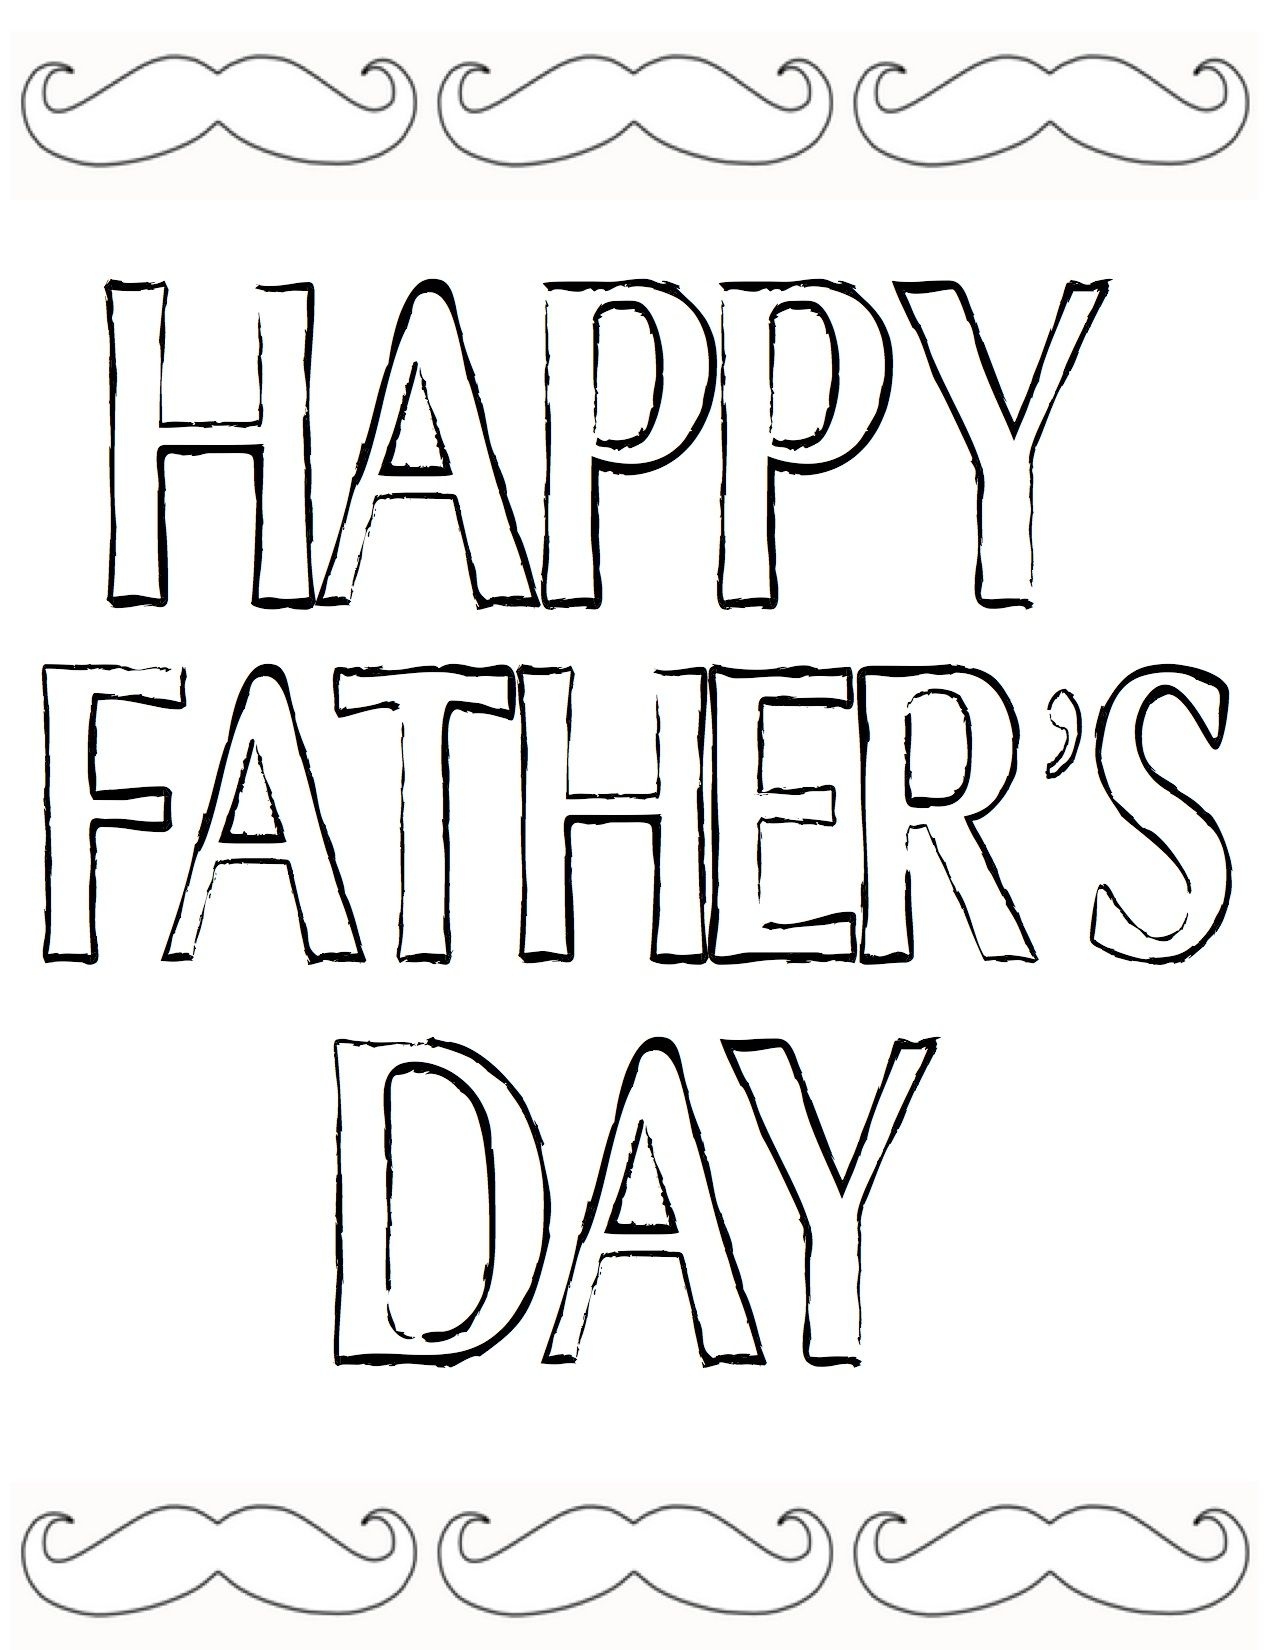 Free Fathers Day Printables And More | Diy Ideas | Pinterest - Free Happy Fathers Day Cards Printable